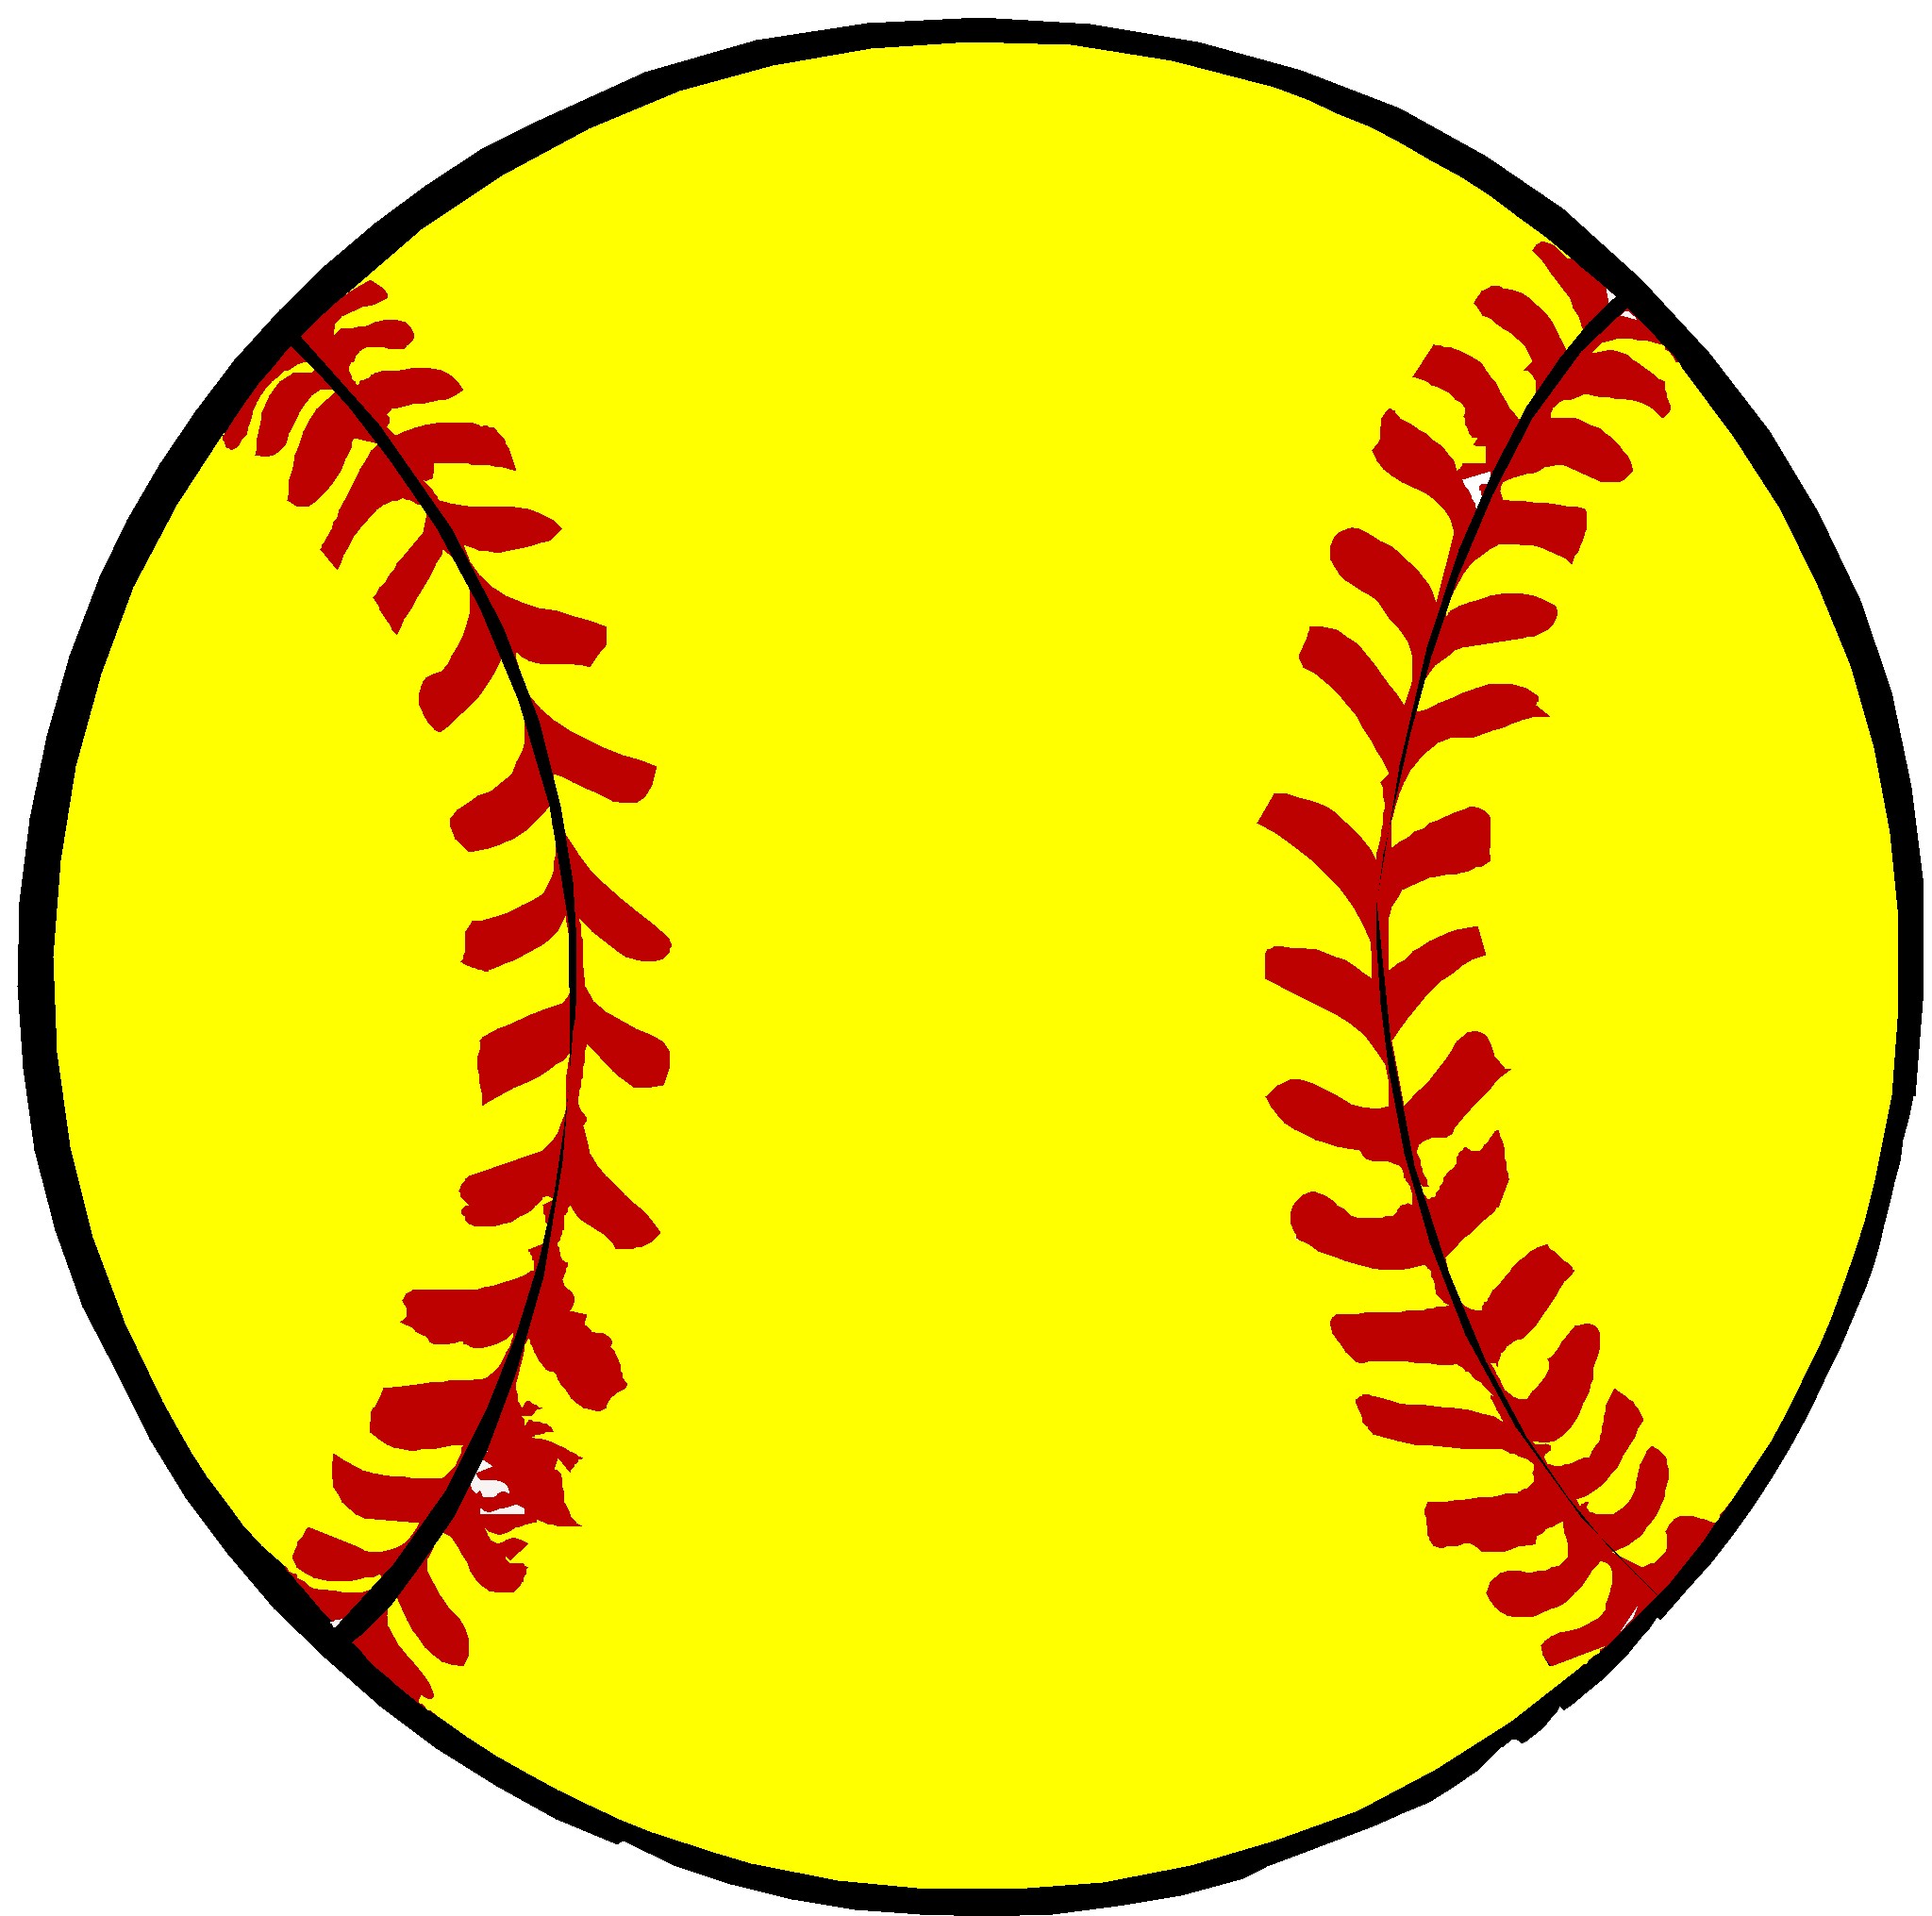 Free Softball Vector Images - ClipArt Best